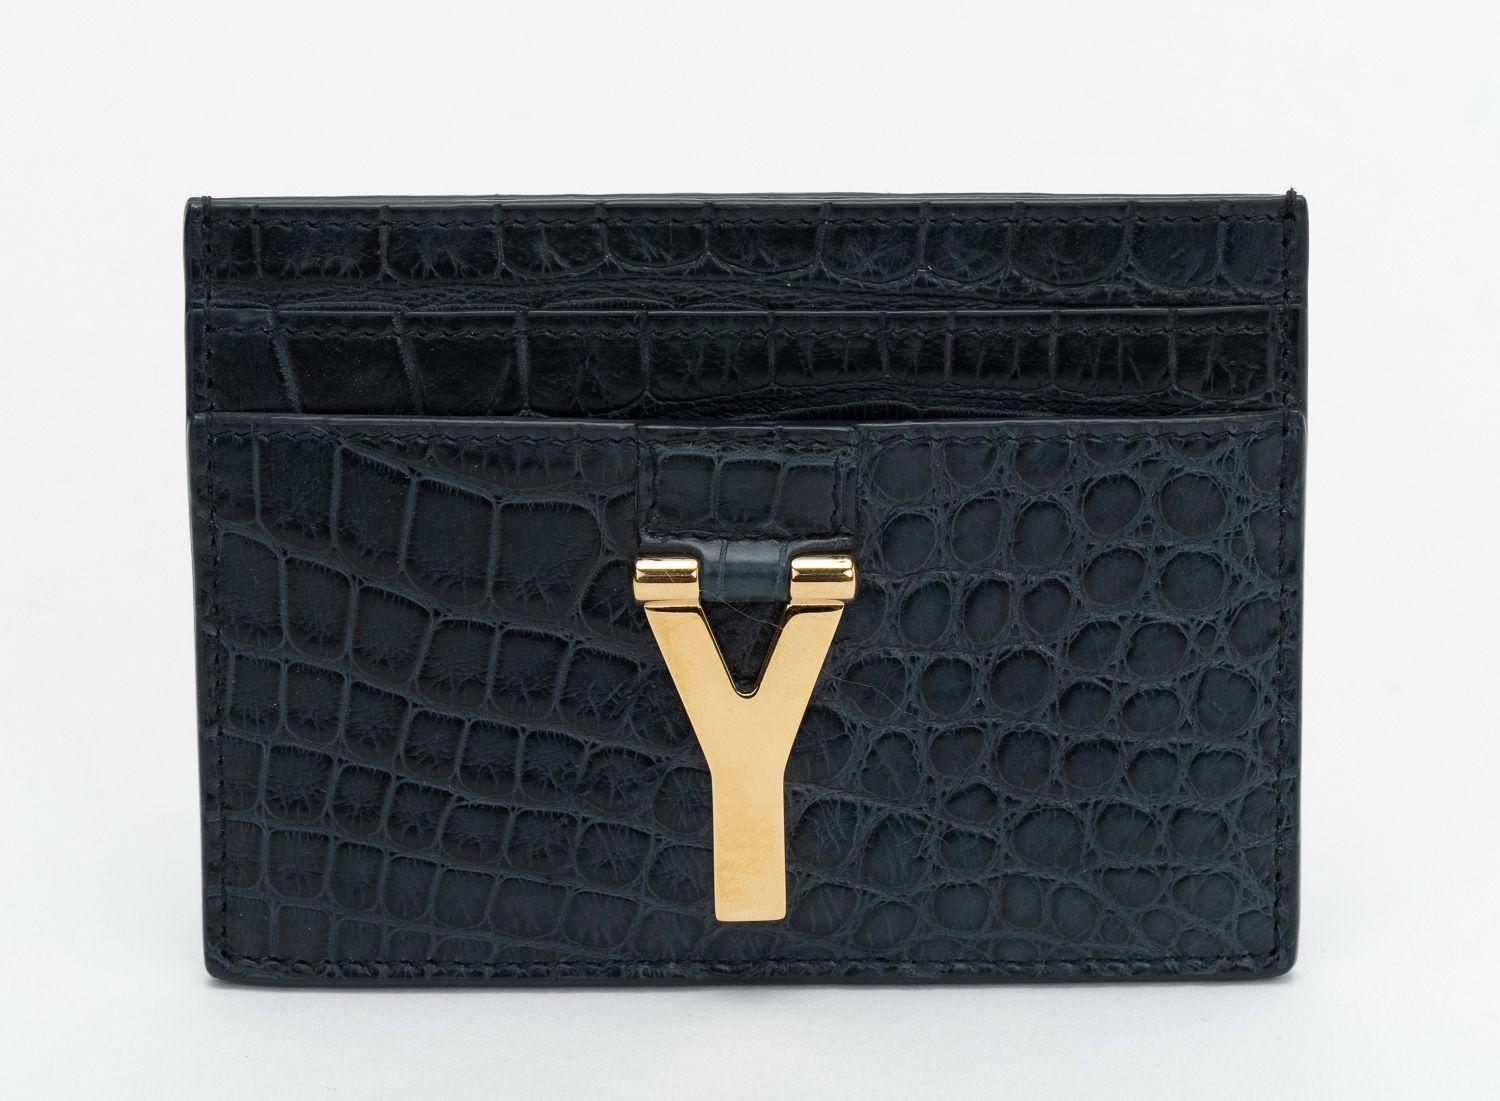 YSL New Card Case in petroleum crocodile - embossed shiny leather.
Gold metal logo on the front.
5 card slots.
Comes with booklet, tag, original dust cover and box.